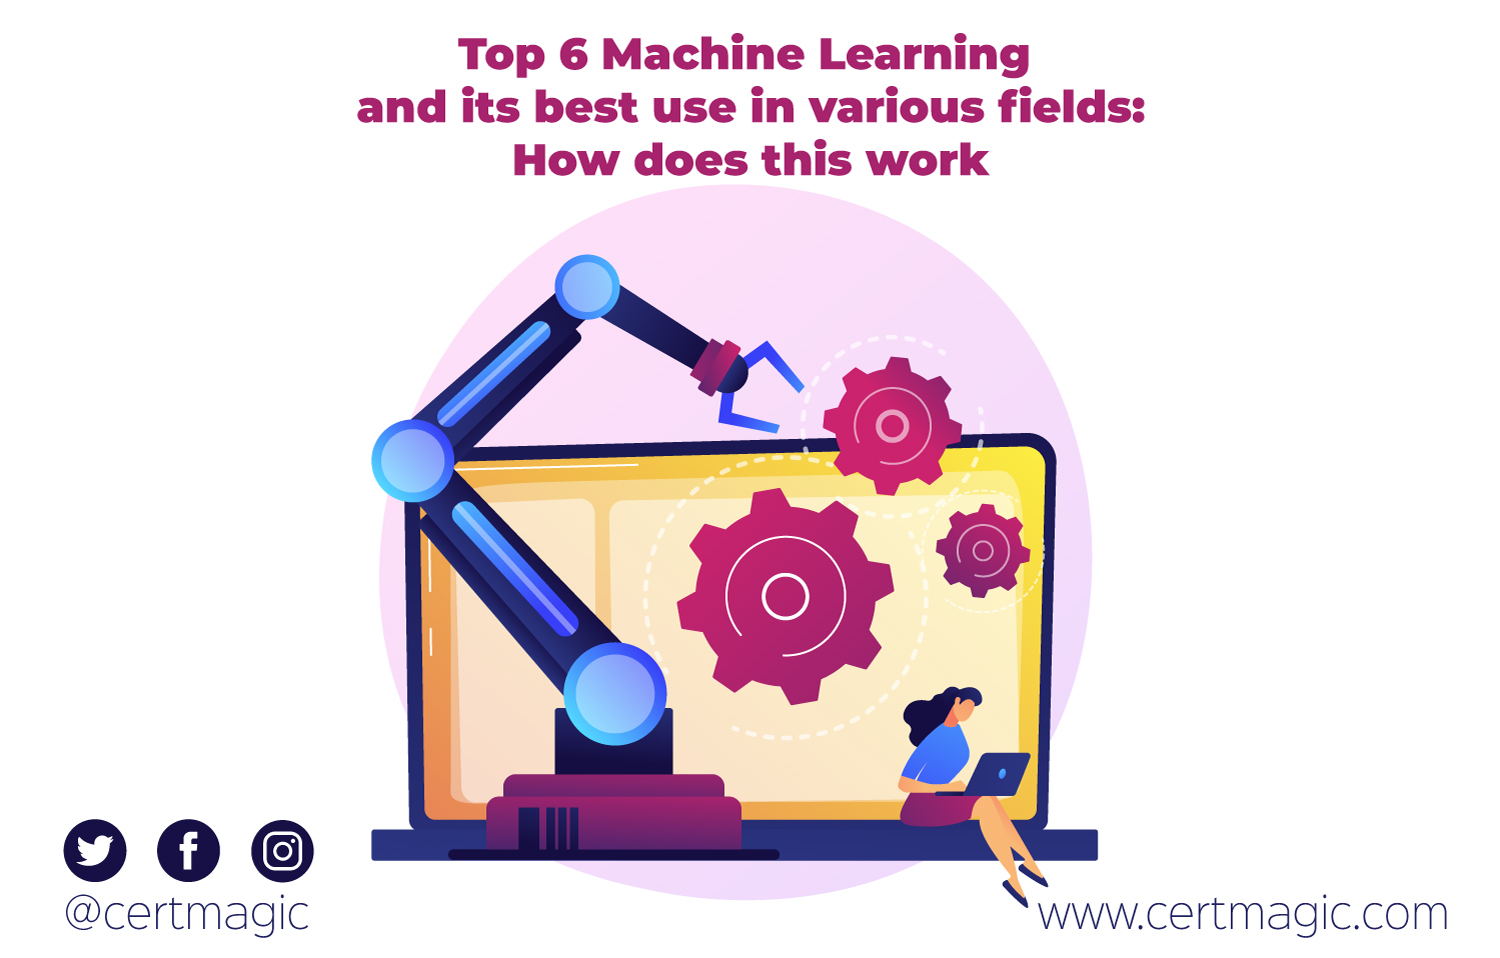 Top 6 Machine Learning and its best use in various fields: How does this work